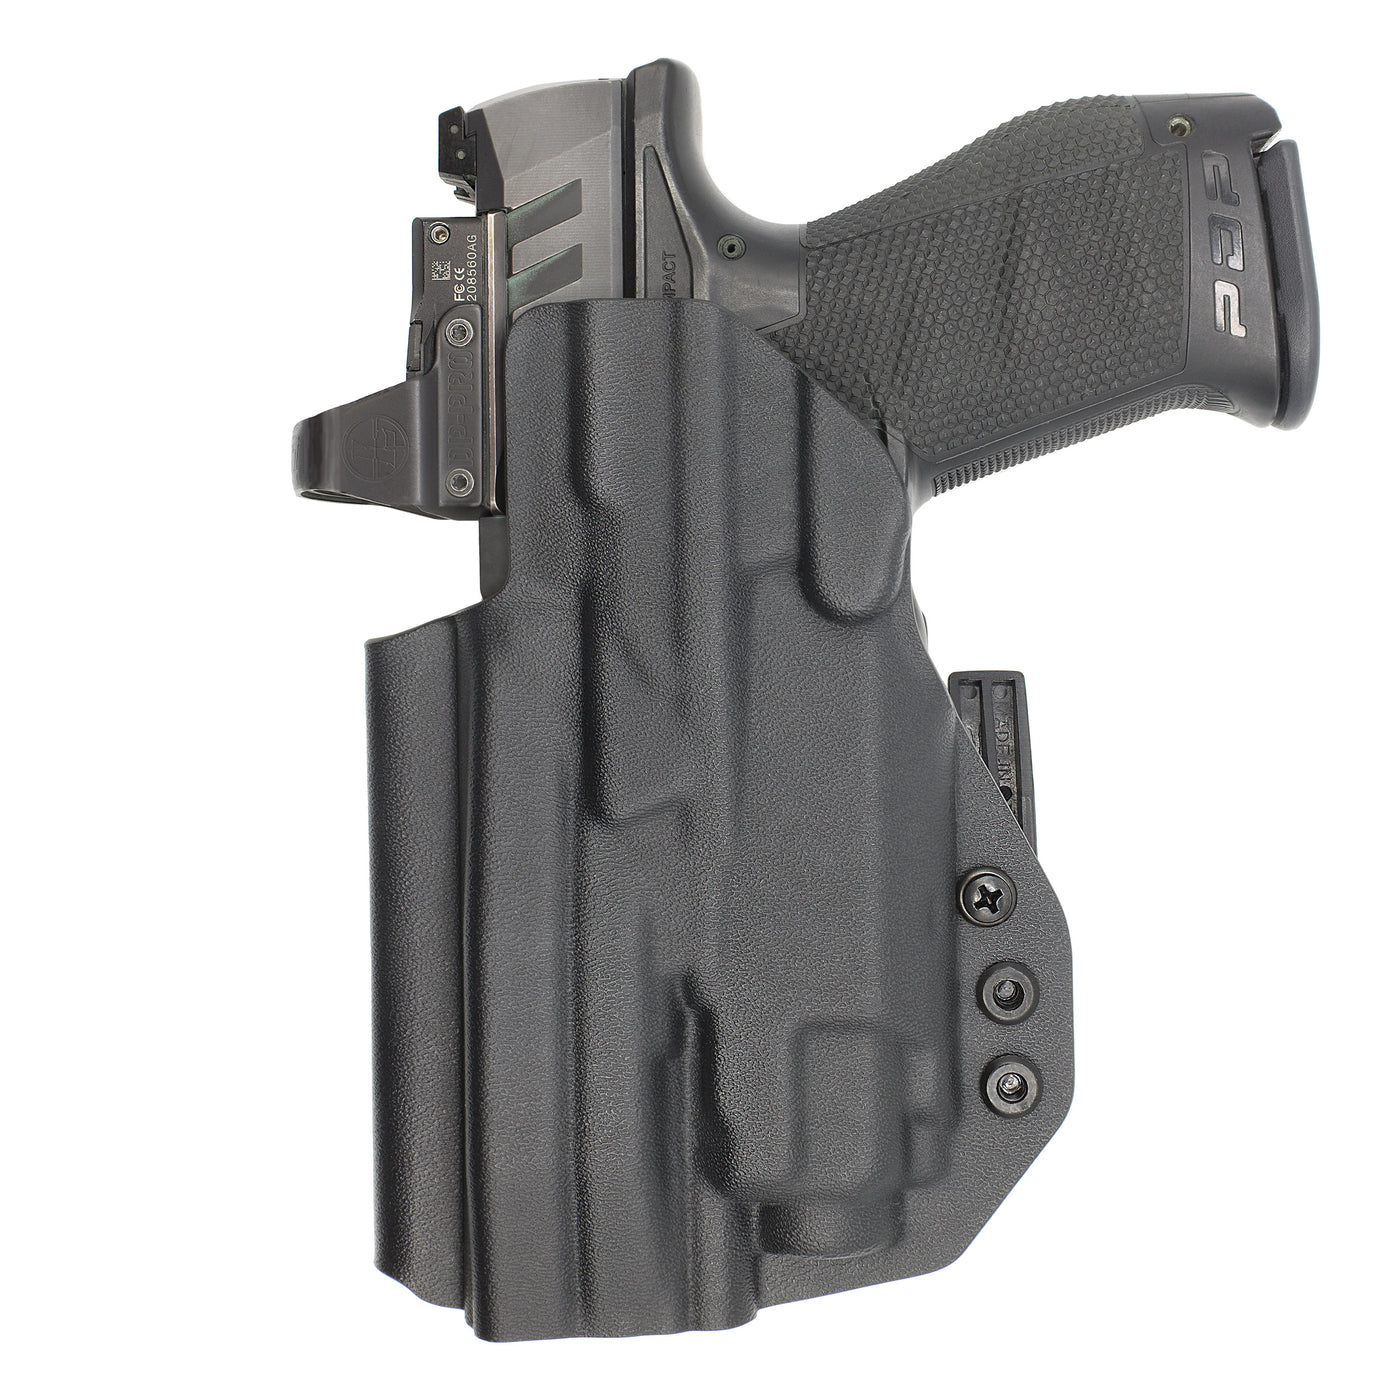 C&G Holsters quickship IWB ALPHA UPGRADE Tactical CZ P07 streamlight TLR8 holstered back view